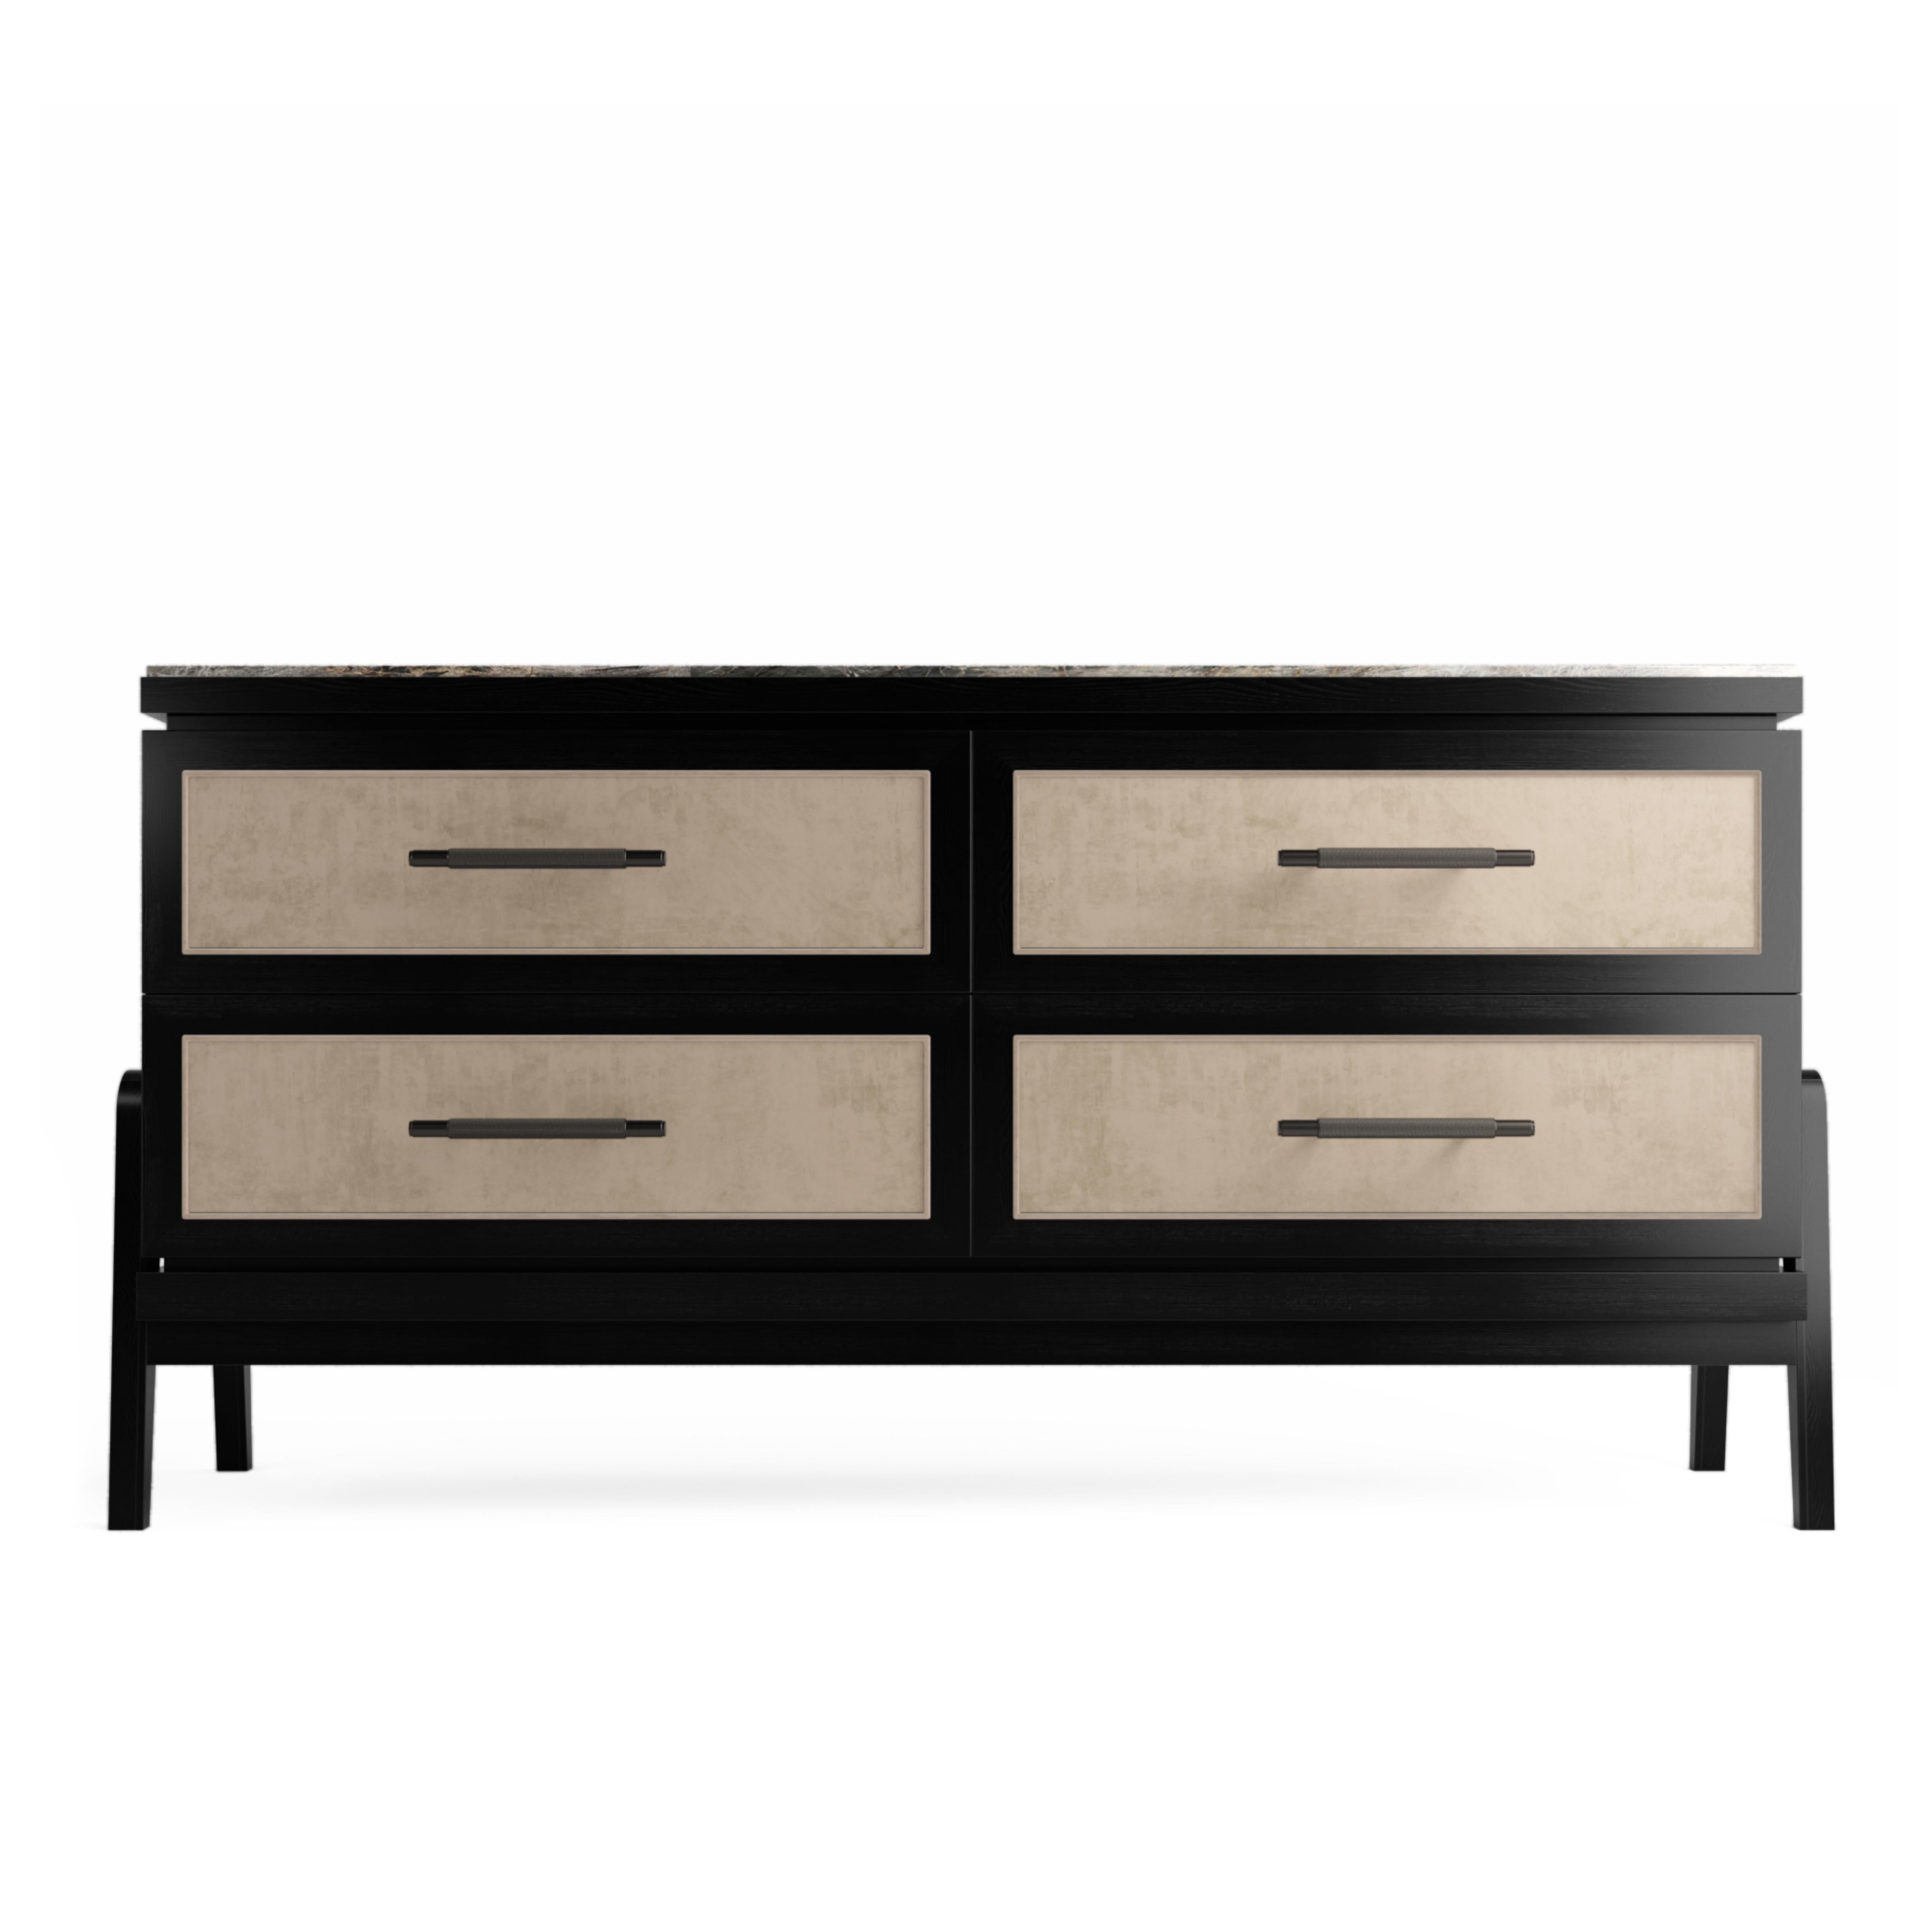 Enhance your living space with the epitome of luxury furniture - the Cupid Chest of Drawer II. This exquisite piece, crafted by the talented Joao Botelho, is a true masterpiece that exudes elegance and sophistication. The sleek lines and strong